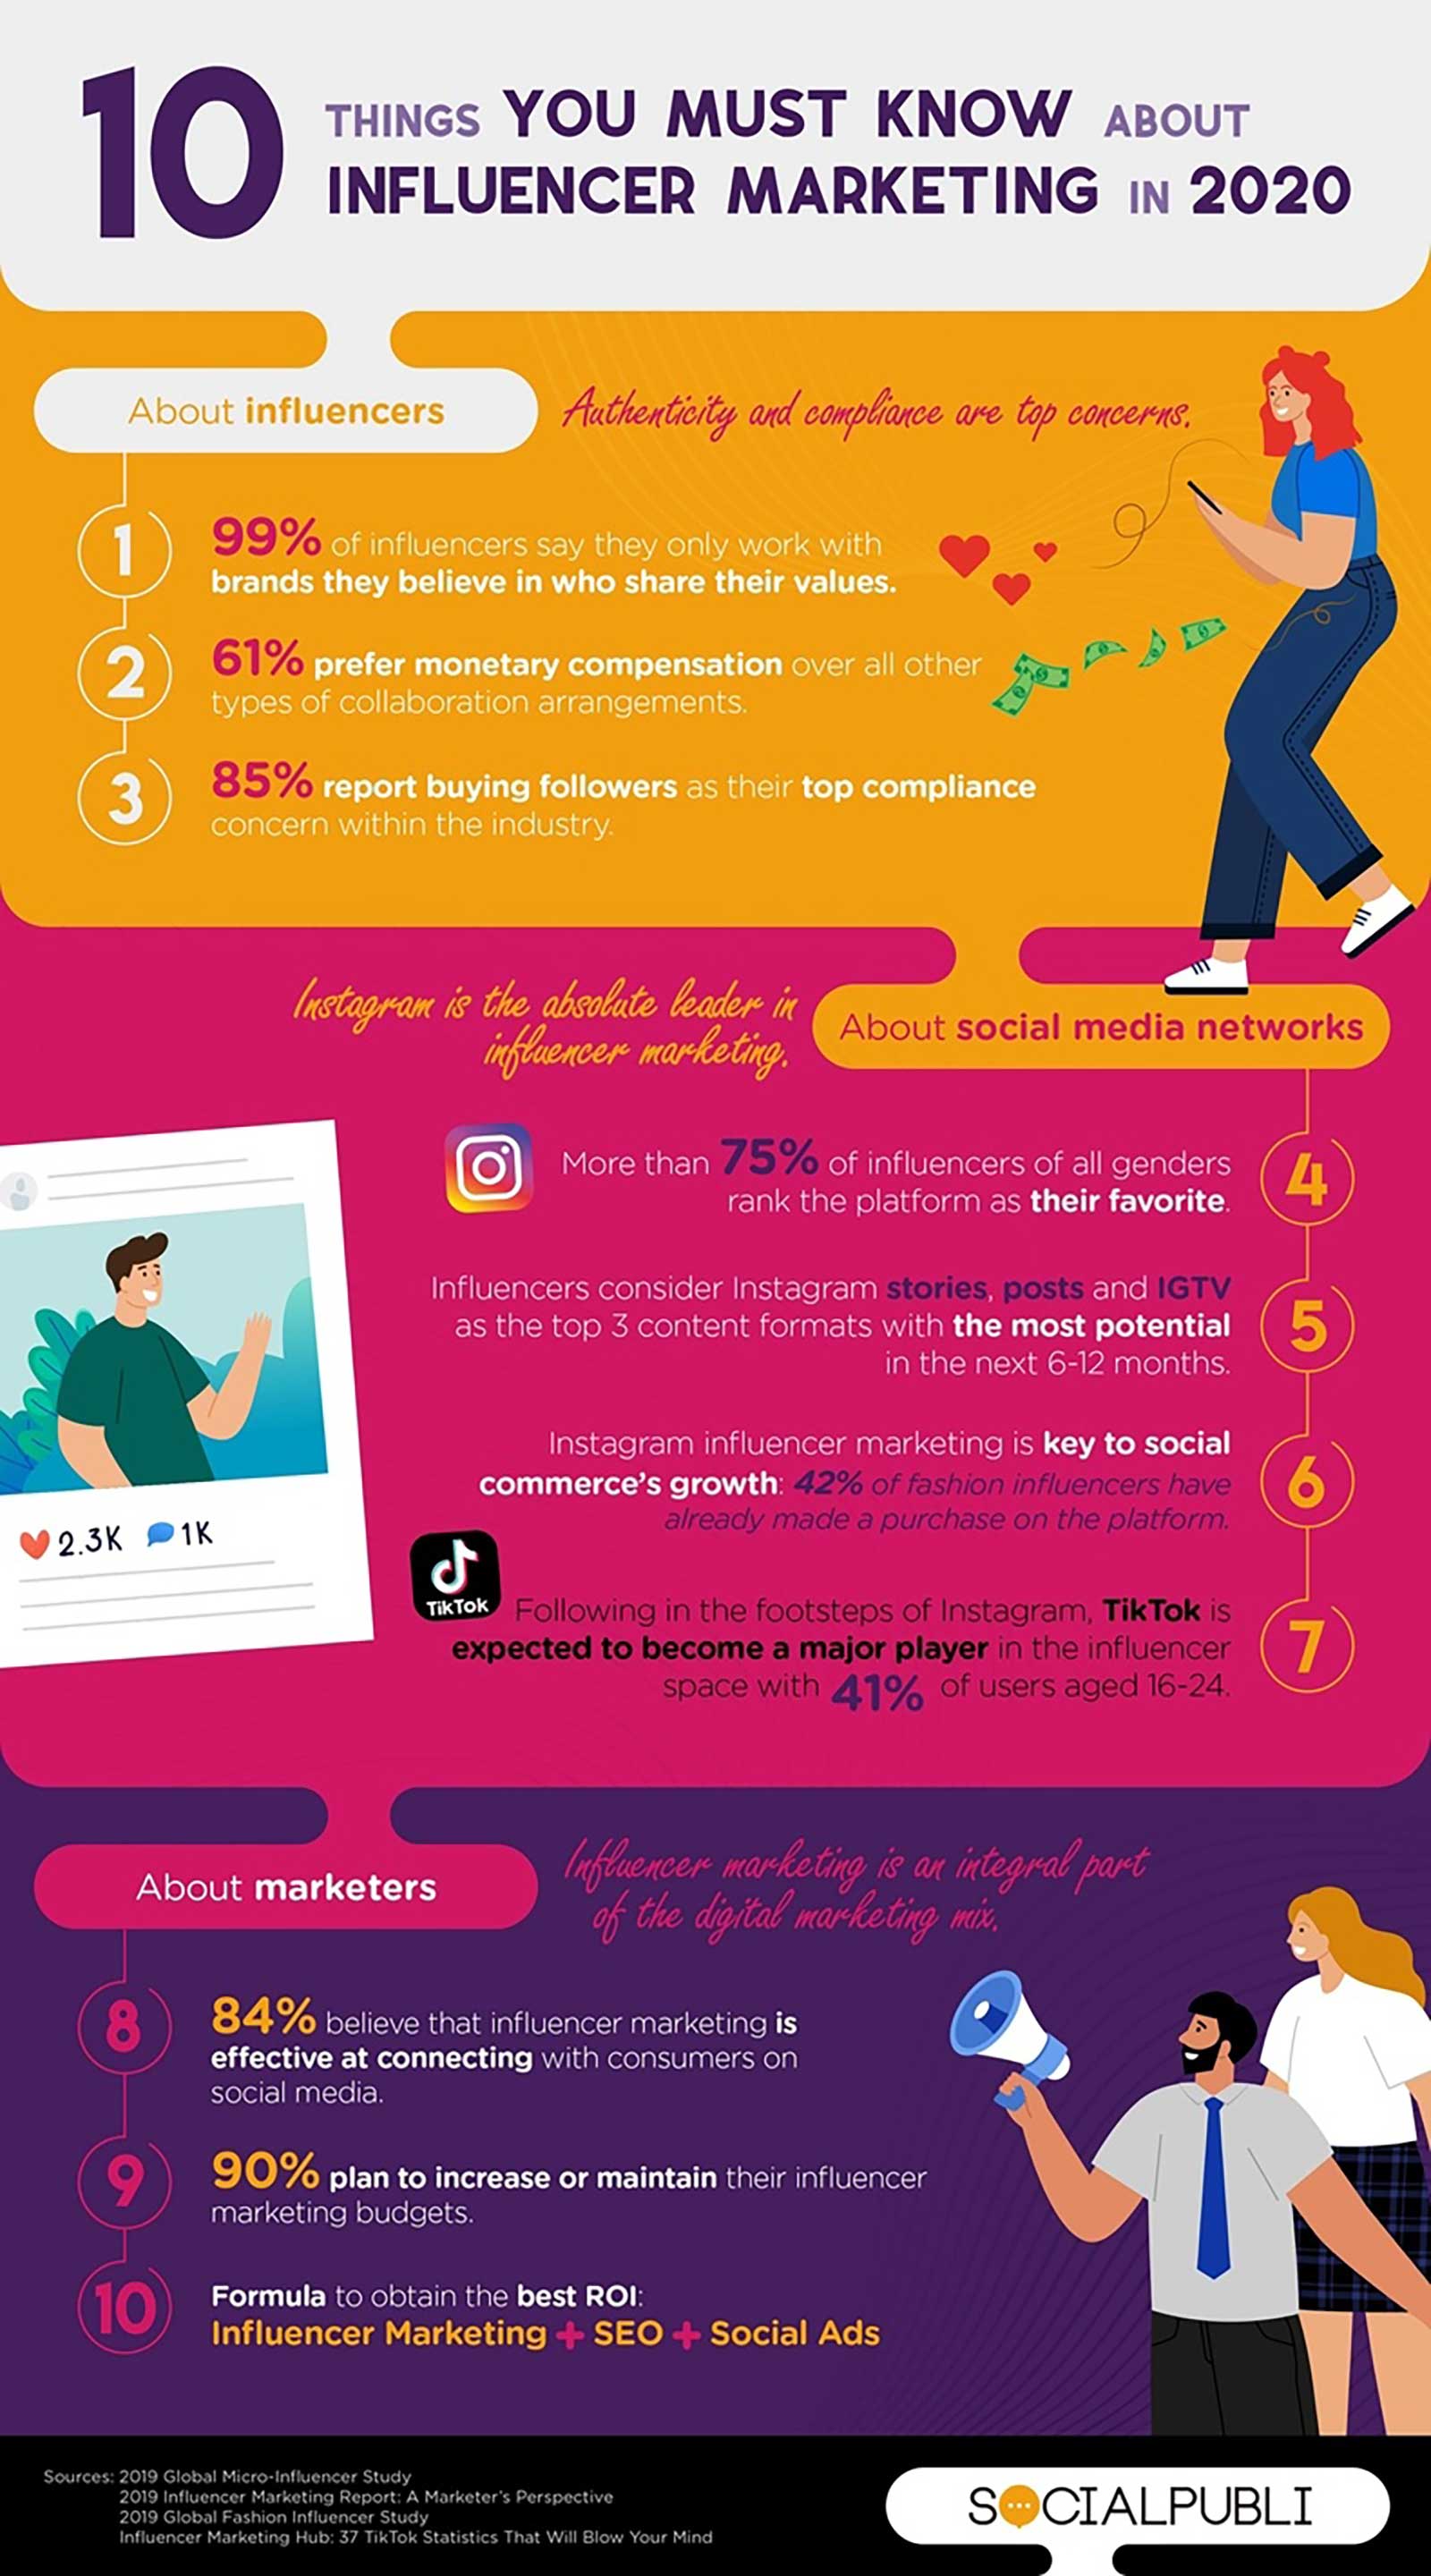 10 Things to Know About Influencer Marketing in 2020